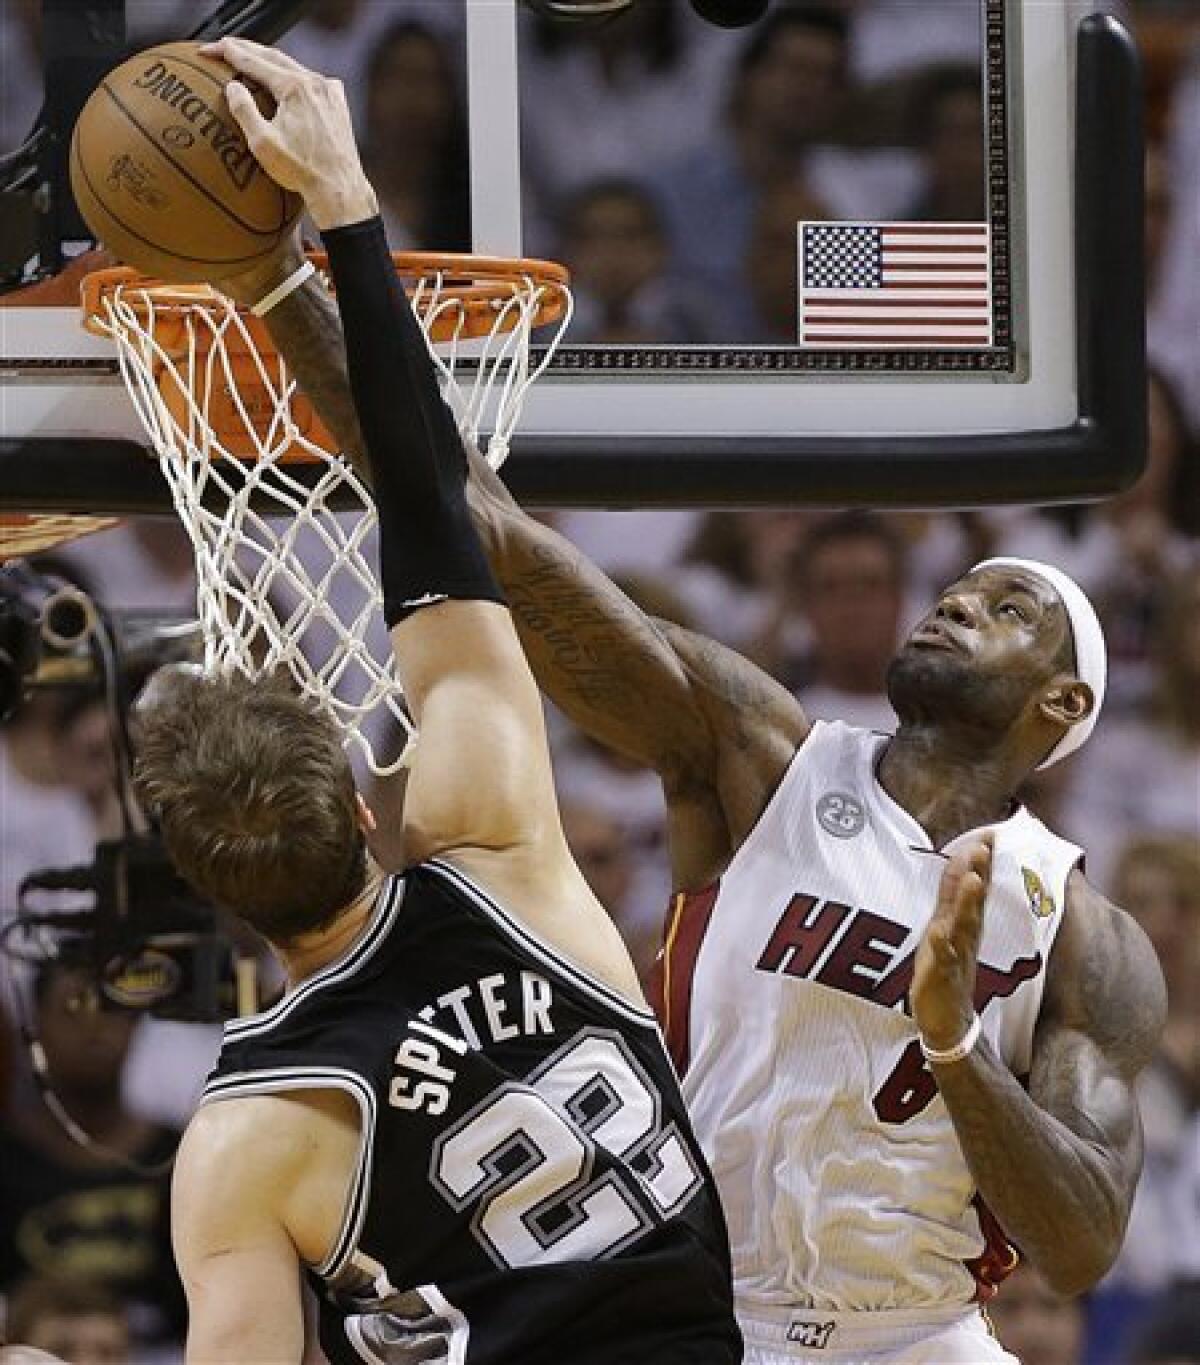 NBA Playoffs 2013, Heat vs. Pacers Game 6: Indiana forces Game 7